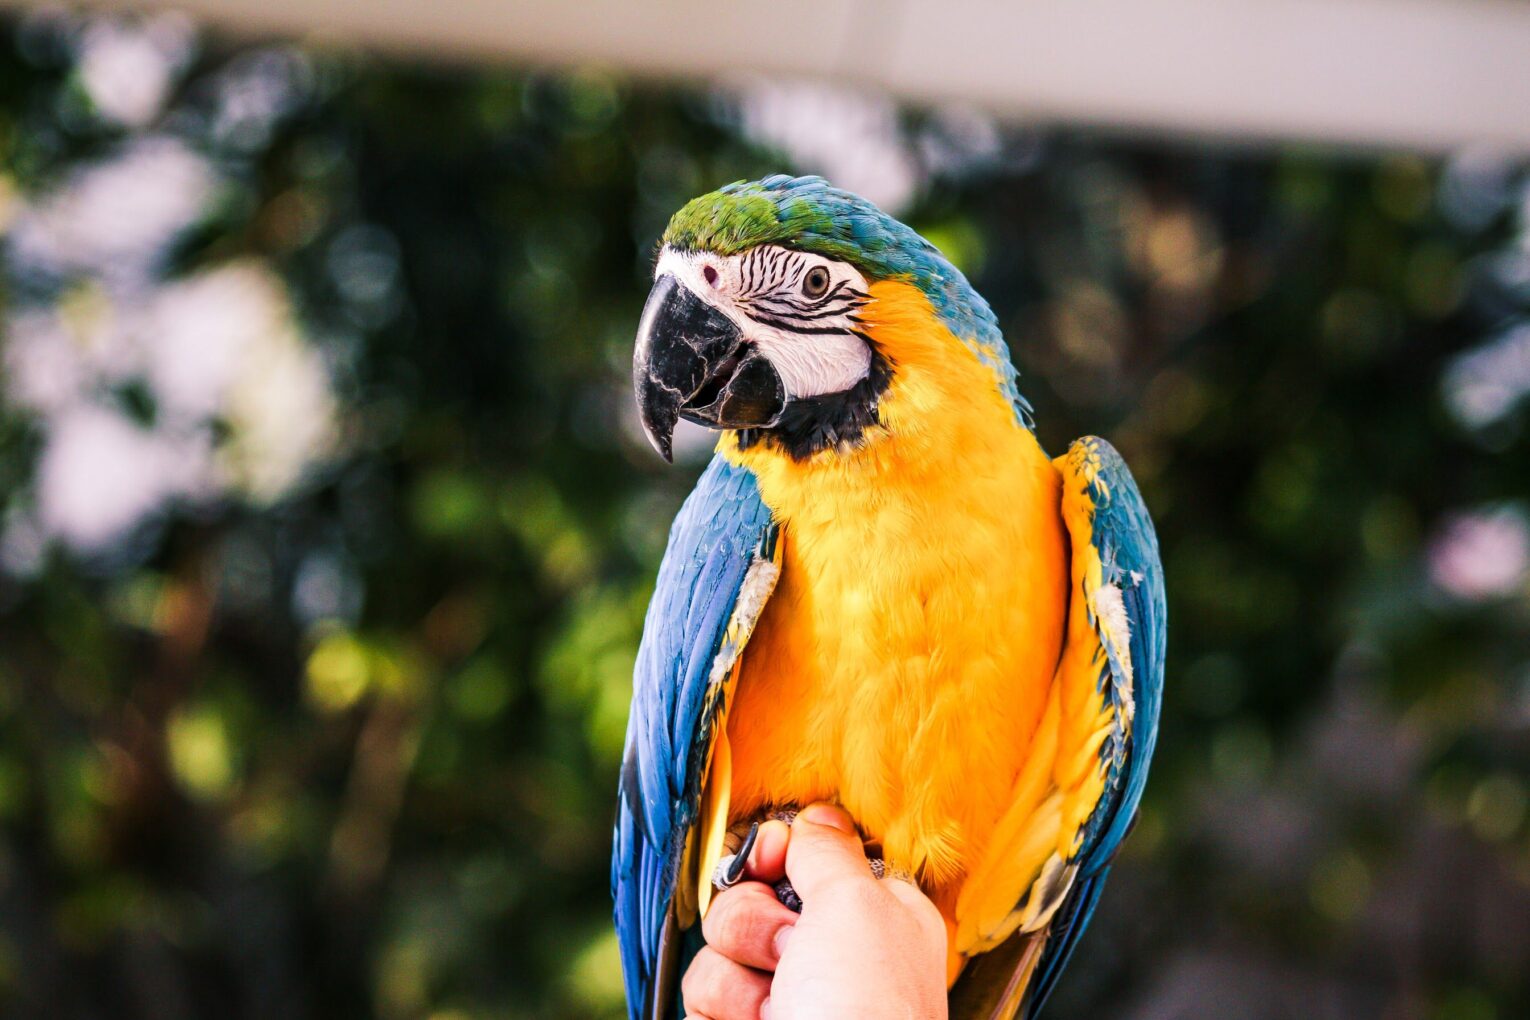 close up of hand holding a bird 1277291554 886920995ba54952b8105e128d859881 1530x1020 - Thinking of Getting a Parrot? | 6 Key Considerations